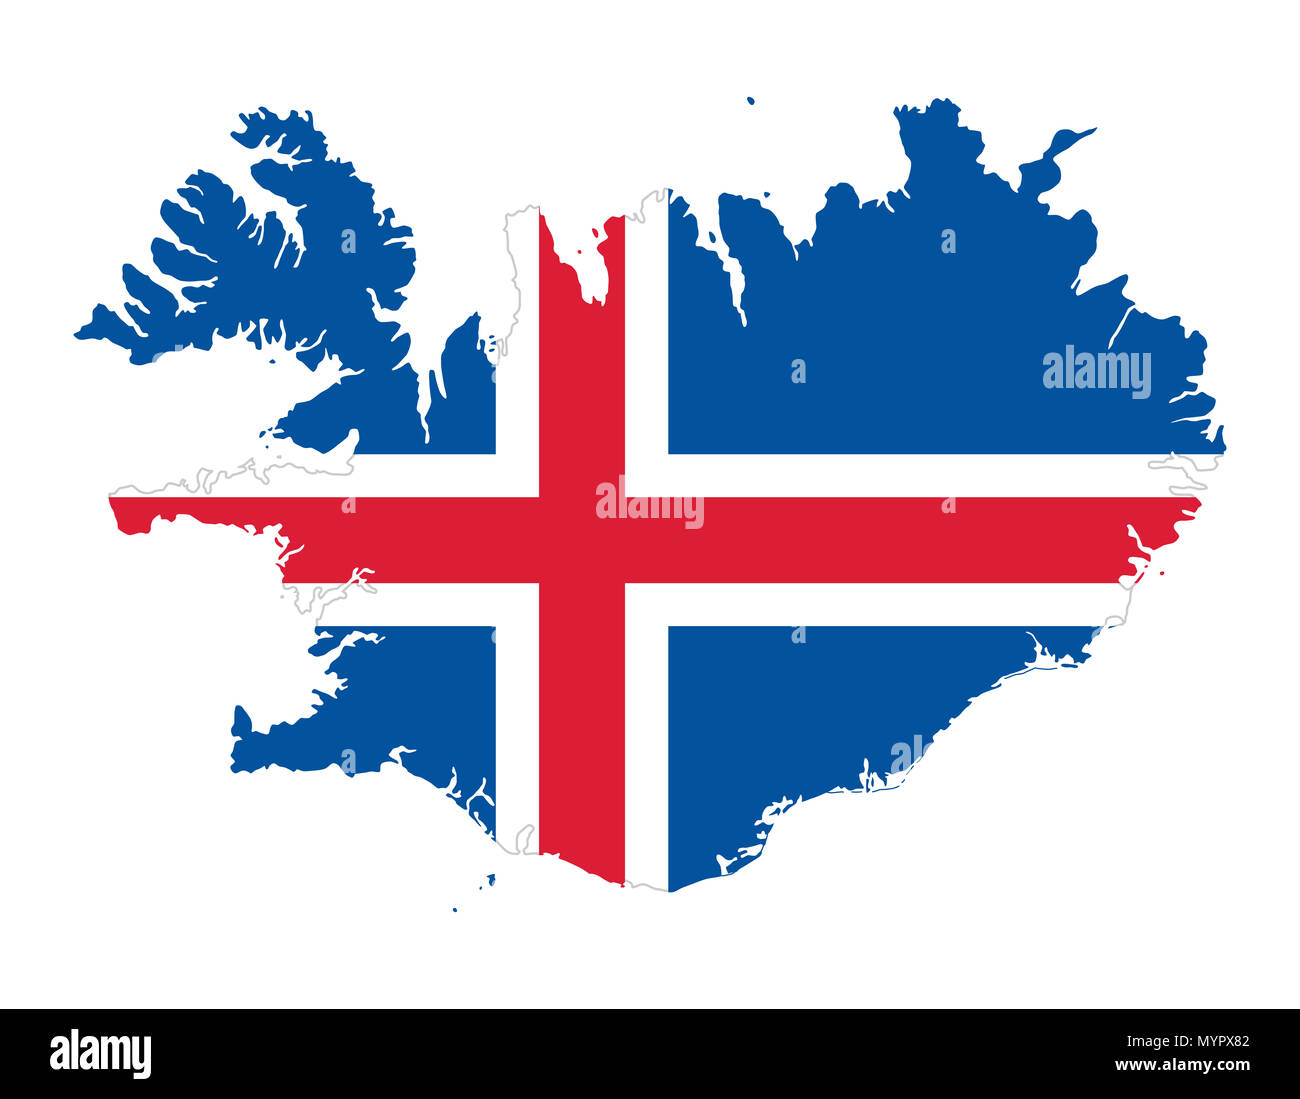 Flag of Iceland in the country silhouette. Blue field with white edged red Nordic cross. Outline of Iceland, a Nordic island country. Stock Photo